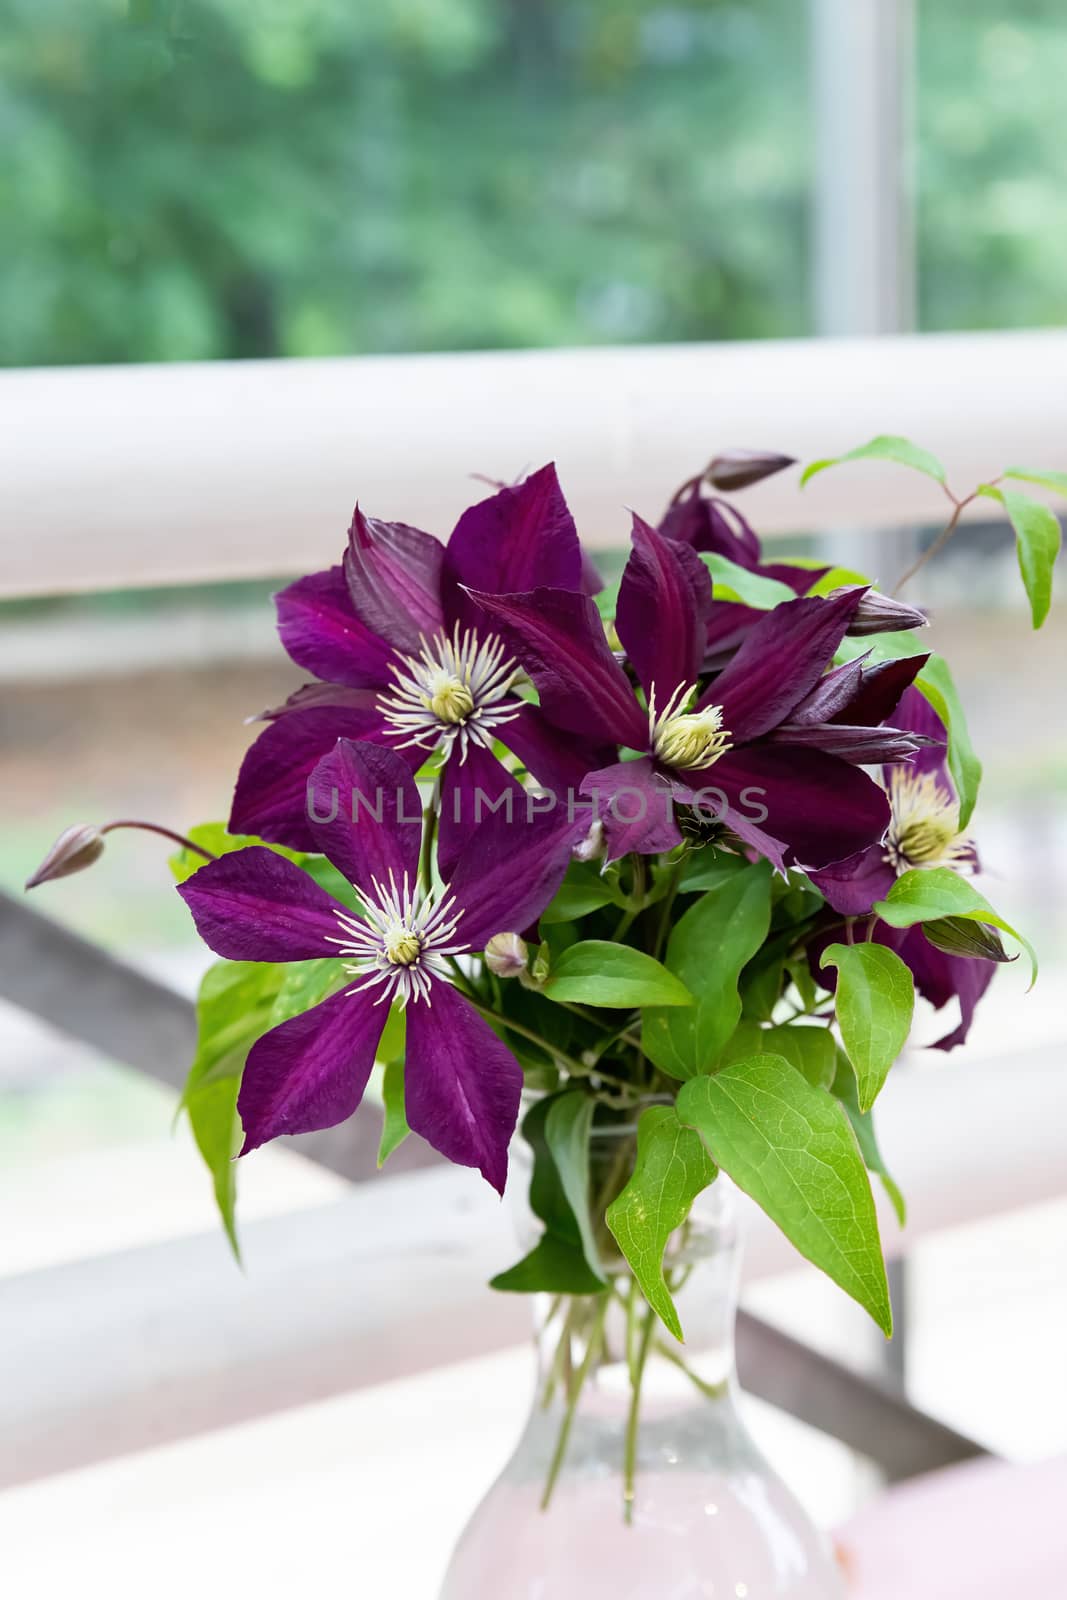 a bouquet of lilac clematis flowers in a glass vase by bonilook